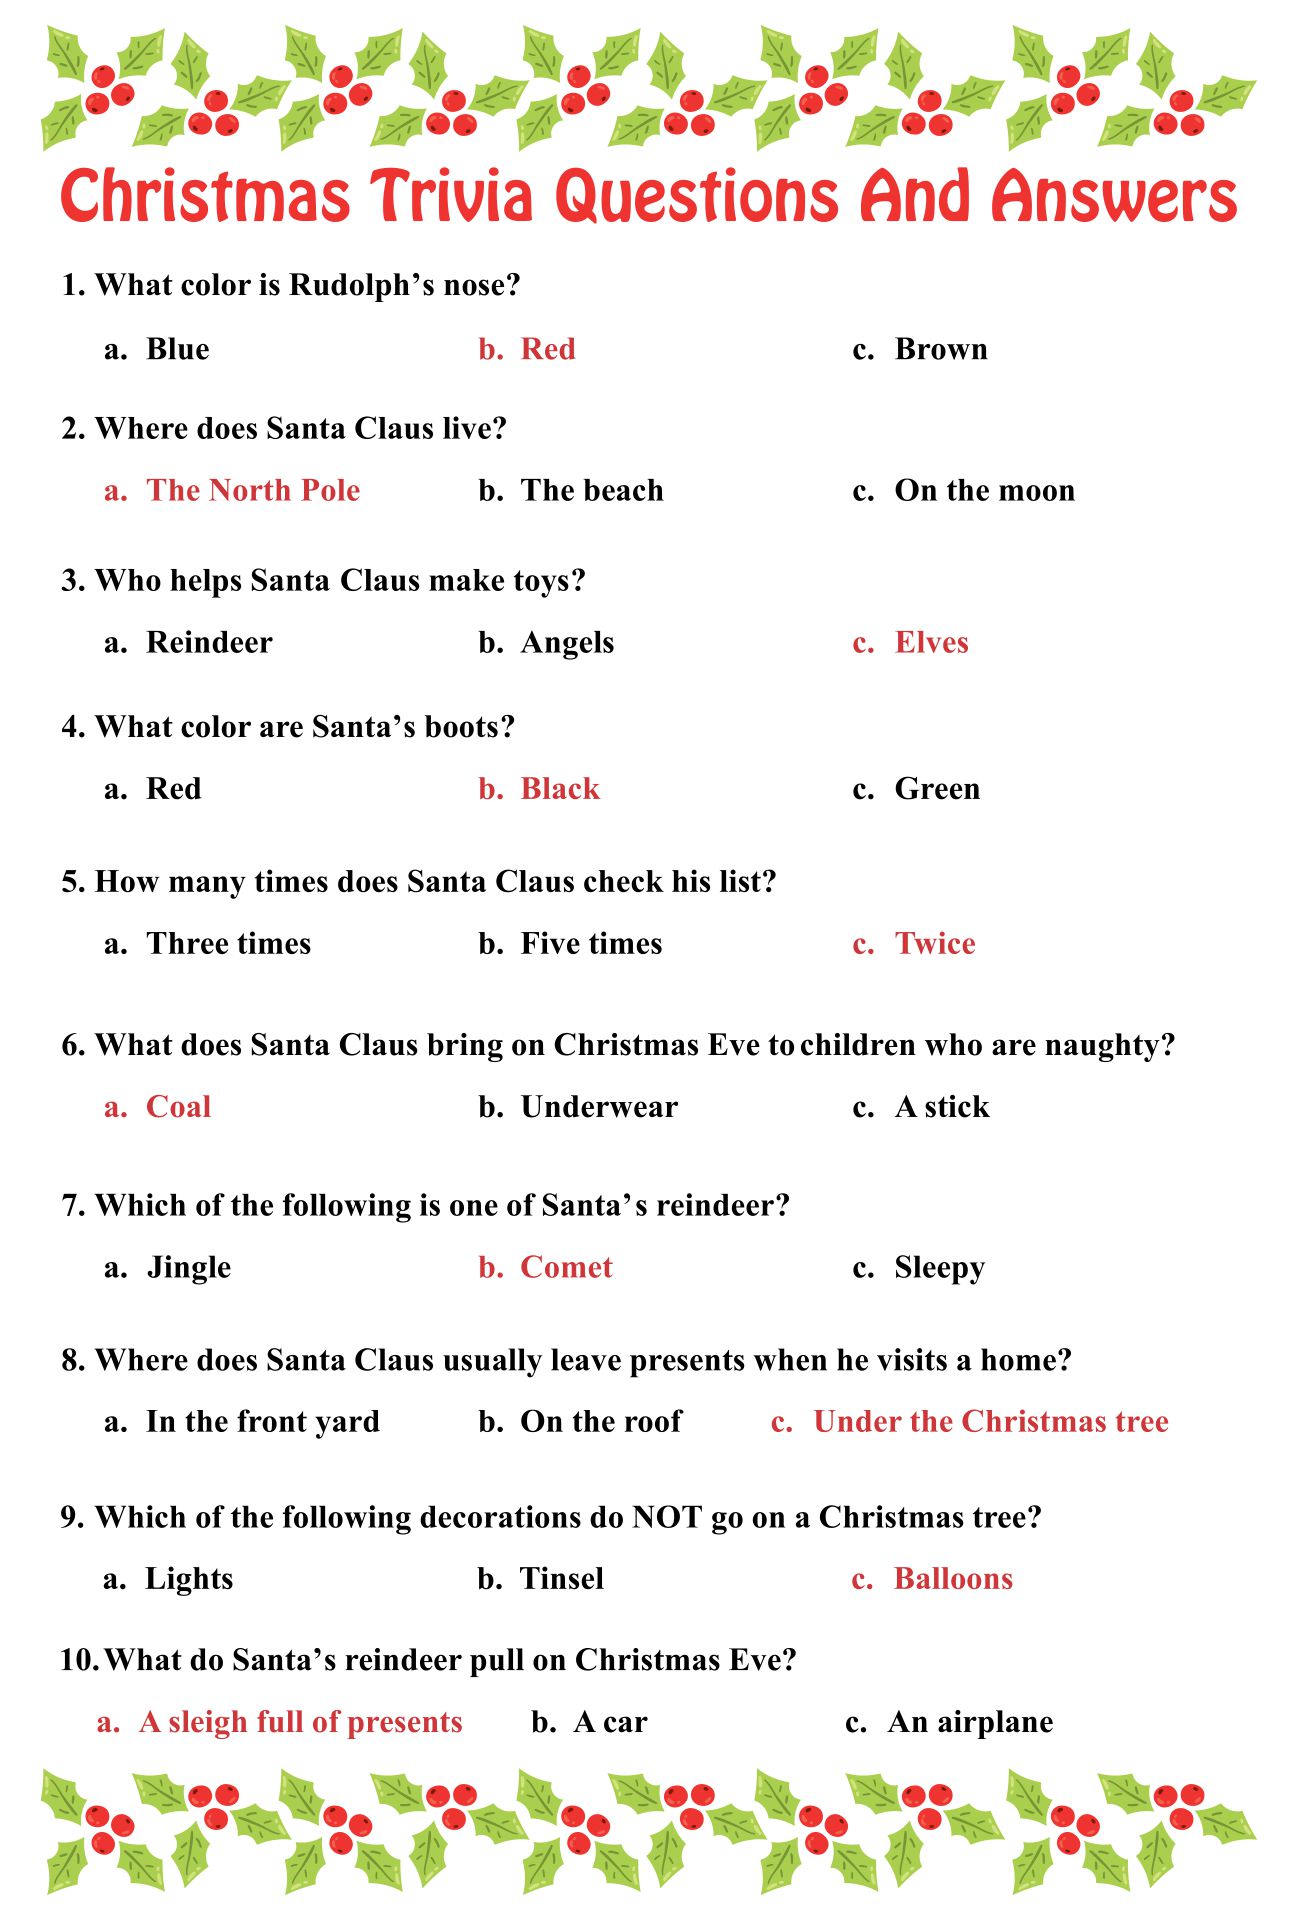 christmas-trivia-movie-questions-2023-new-perfect-the-best-famous